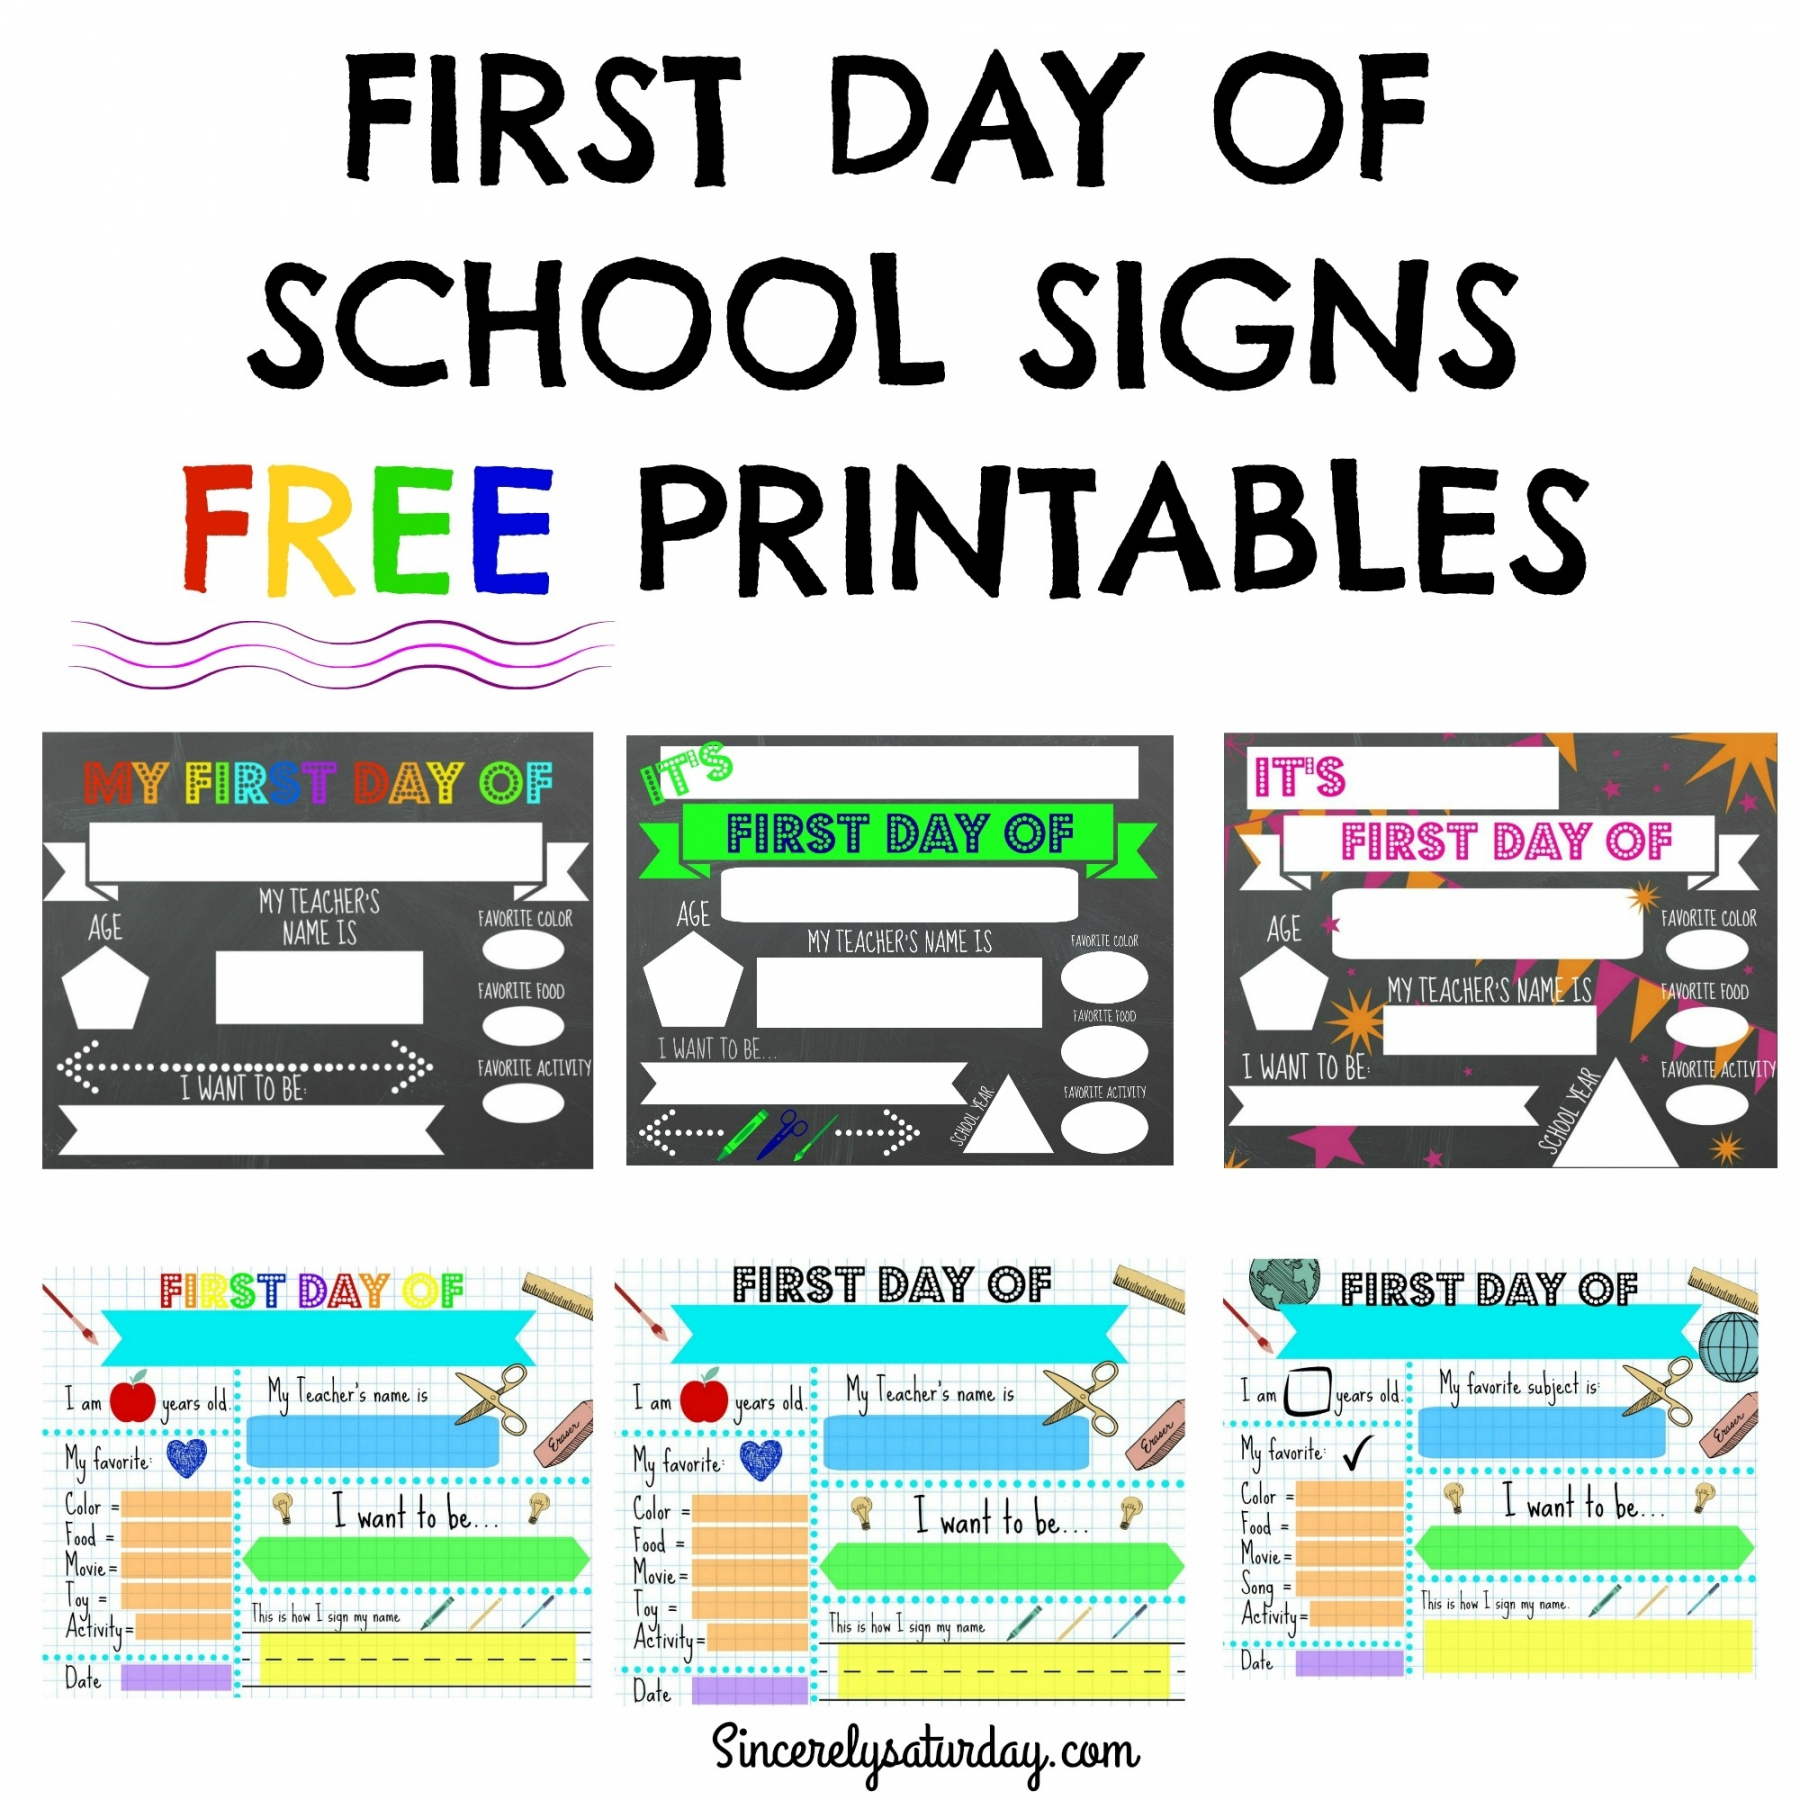 FREE PRINTABLE FIRST DAY OF SCHOOL SIGNS - Sincerely Saturday - FREE Printables - First Day Of School Sign Printable Free